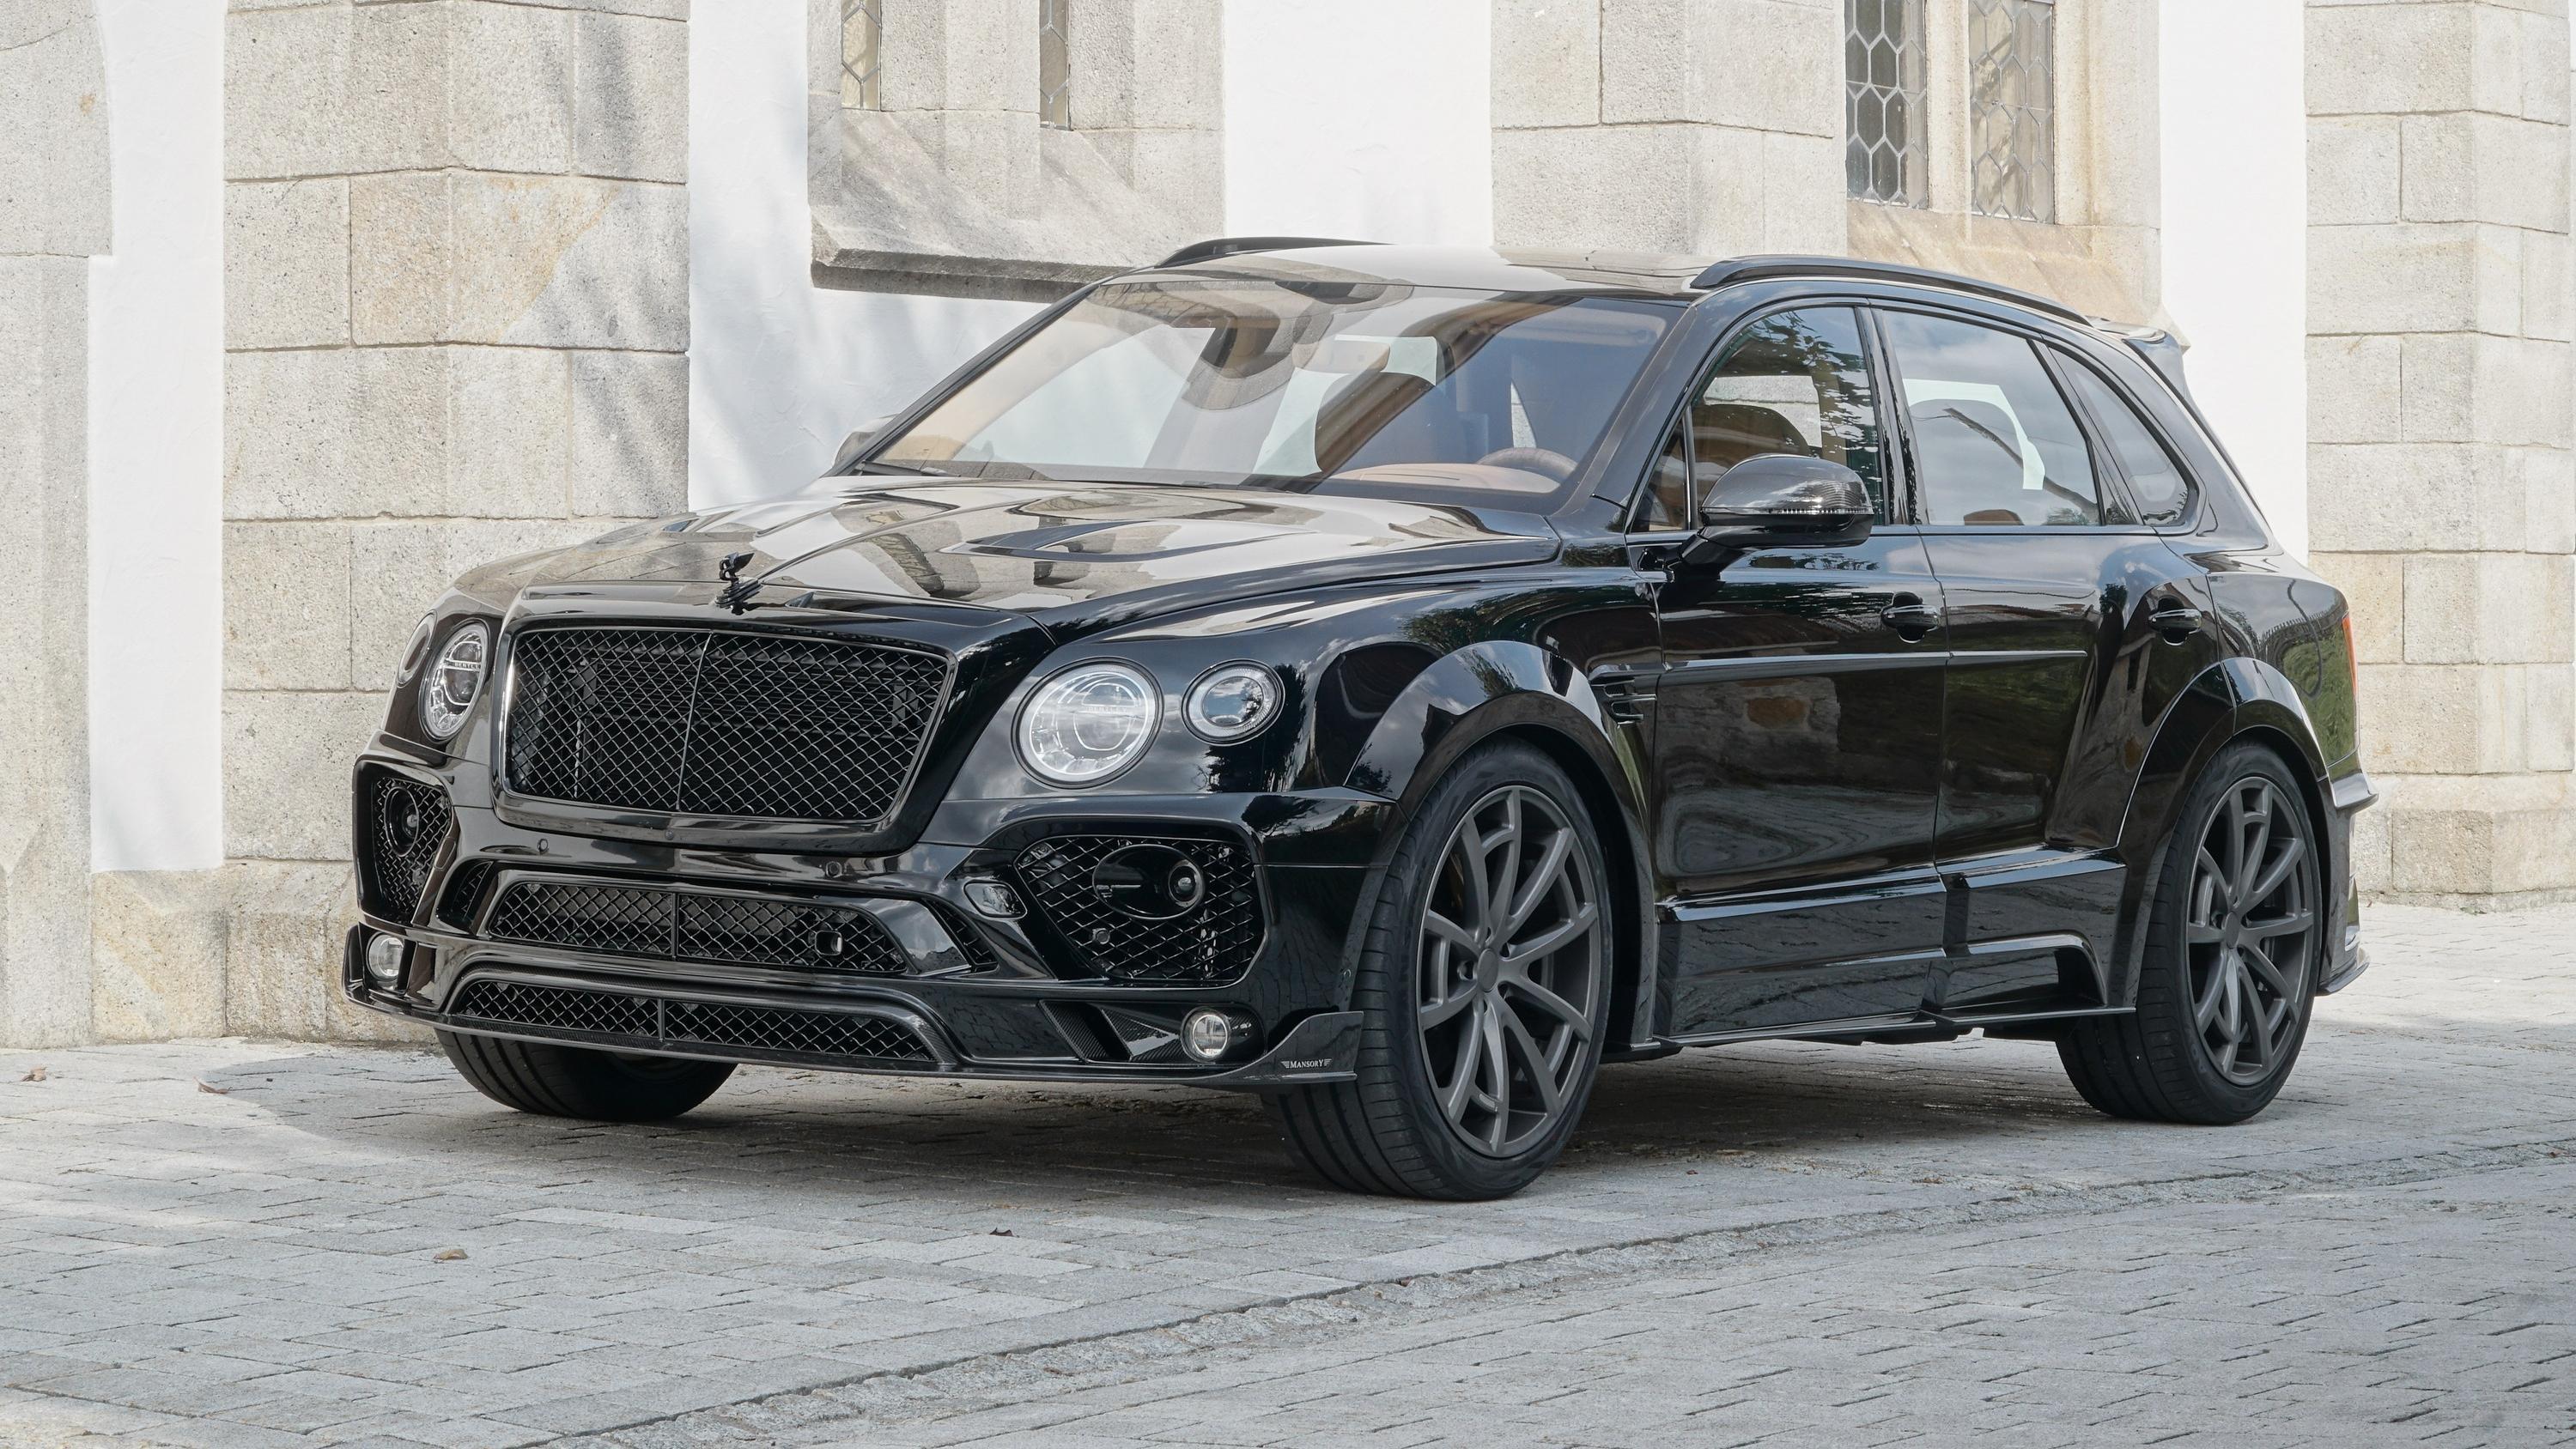 Bentley Bentayga By Mansory Picture, Photo, Wallpaper. Top